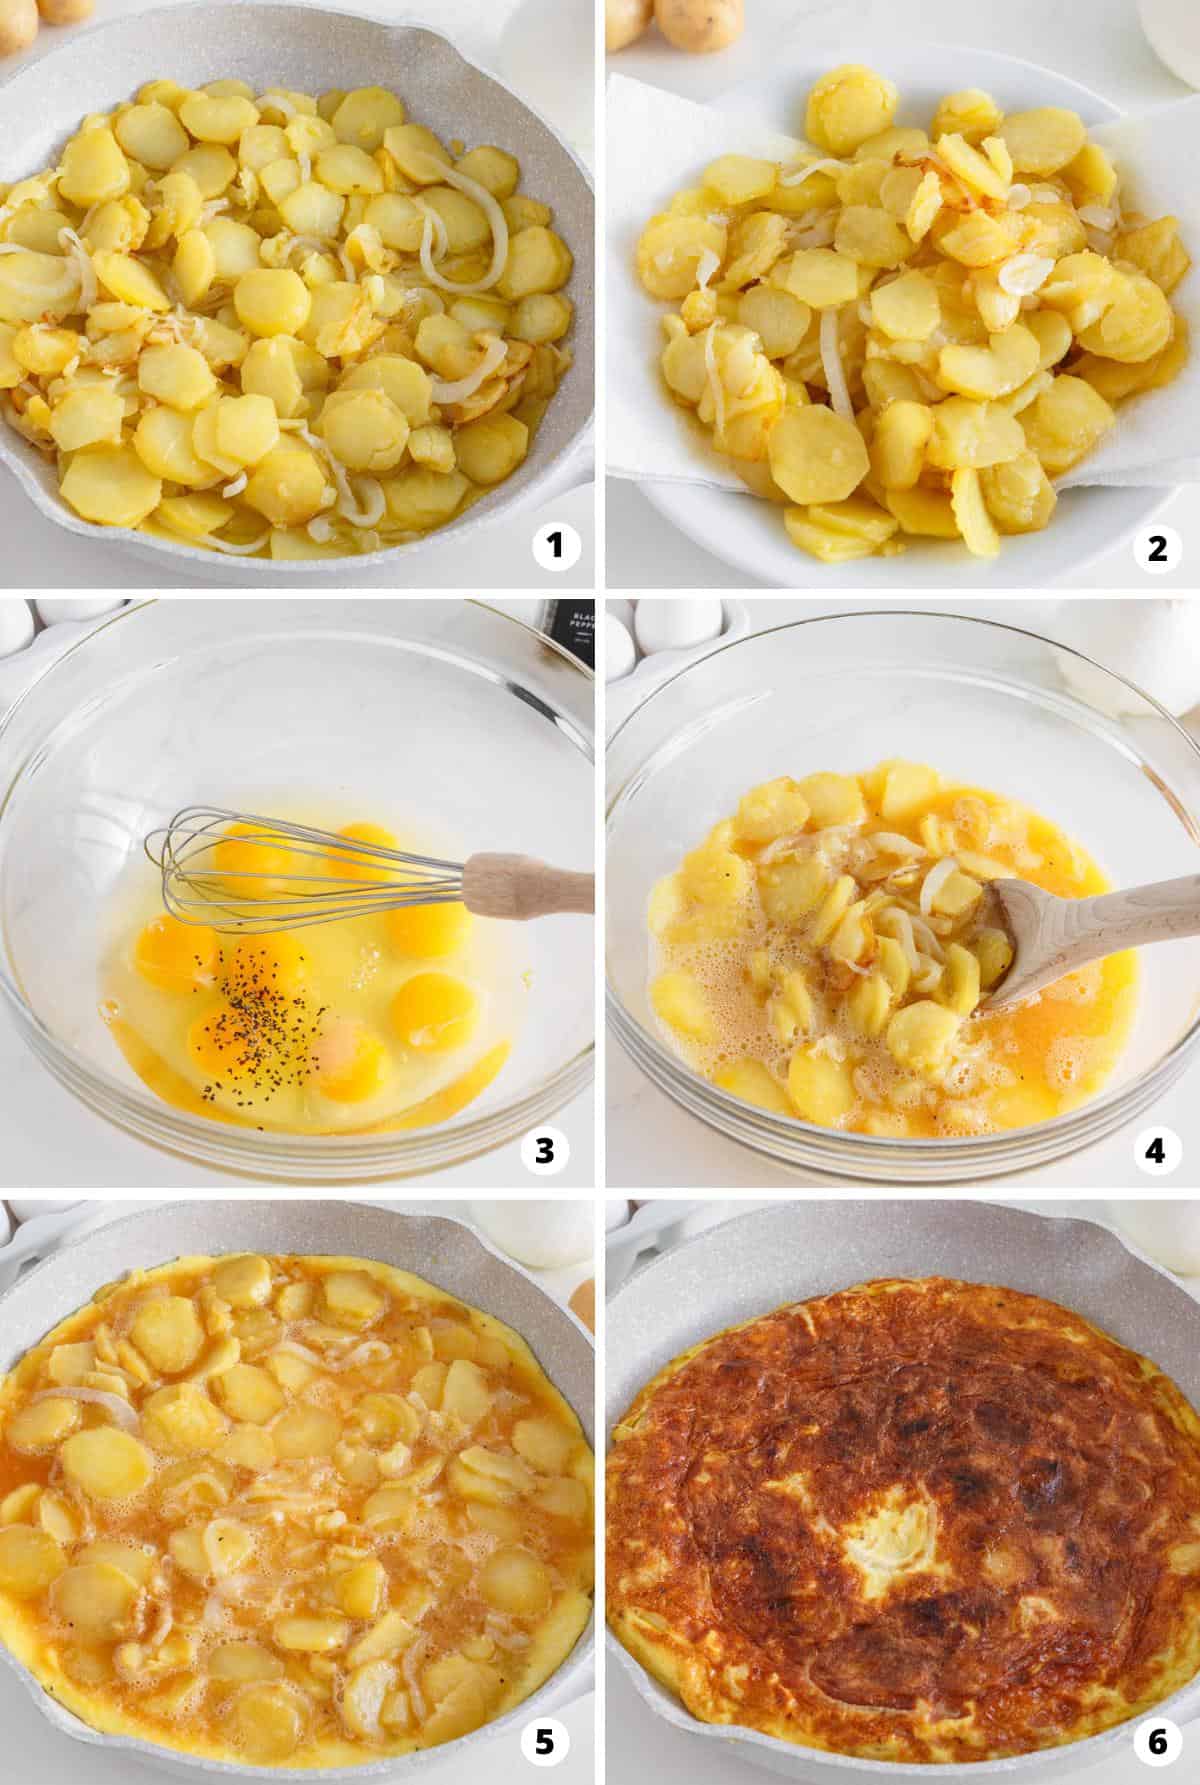 Showing how to make a spanish omelette in a 6 step collage.